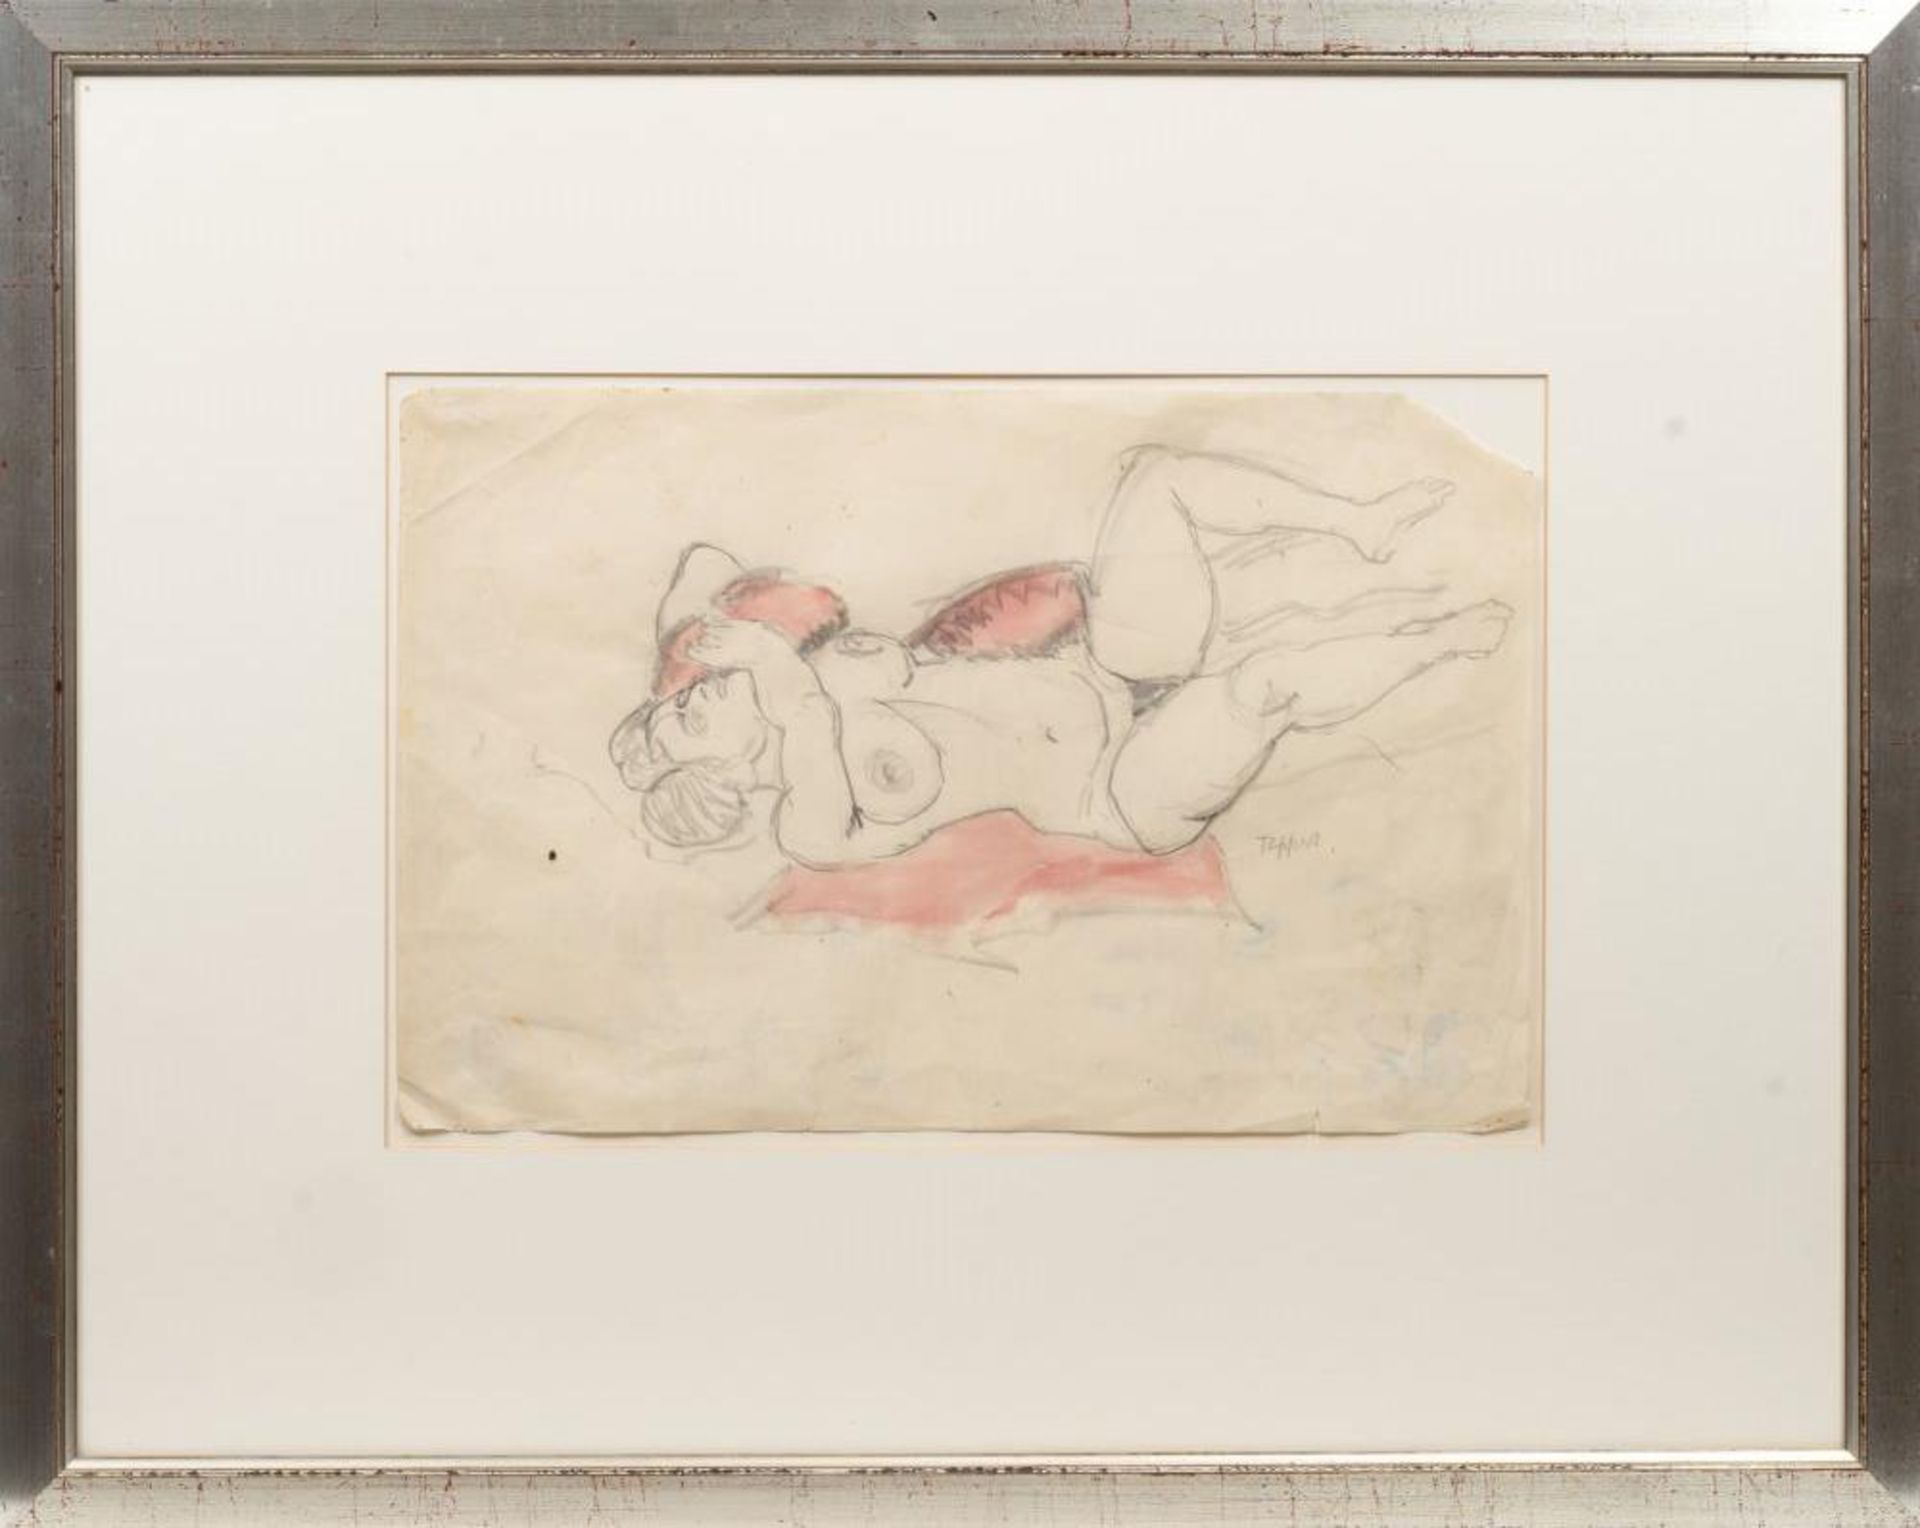 Tappert, Georg (Berlin 1880 - Berlin 1957). Betty with red Pillow. - Image 2 of 2